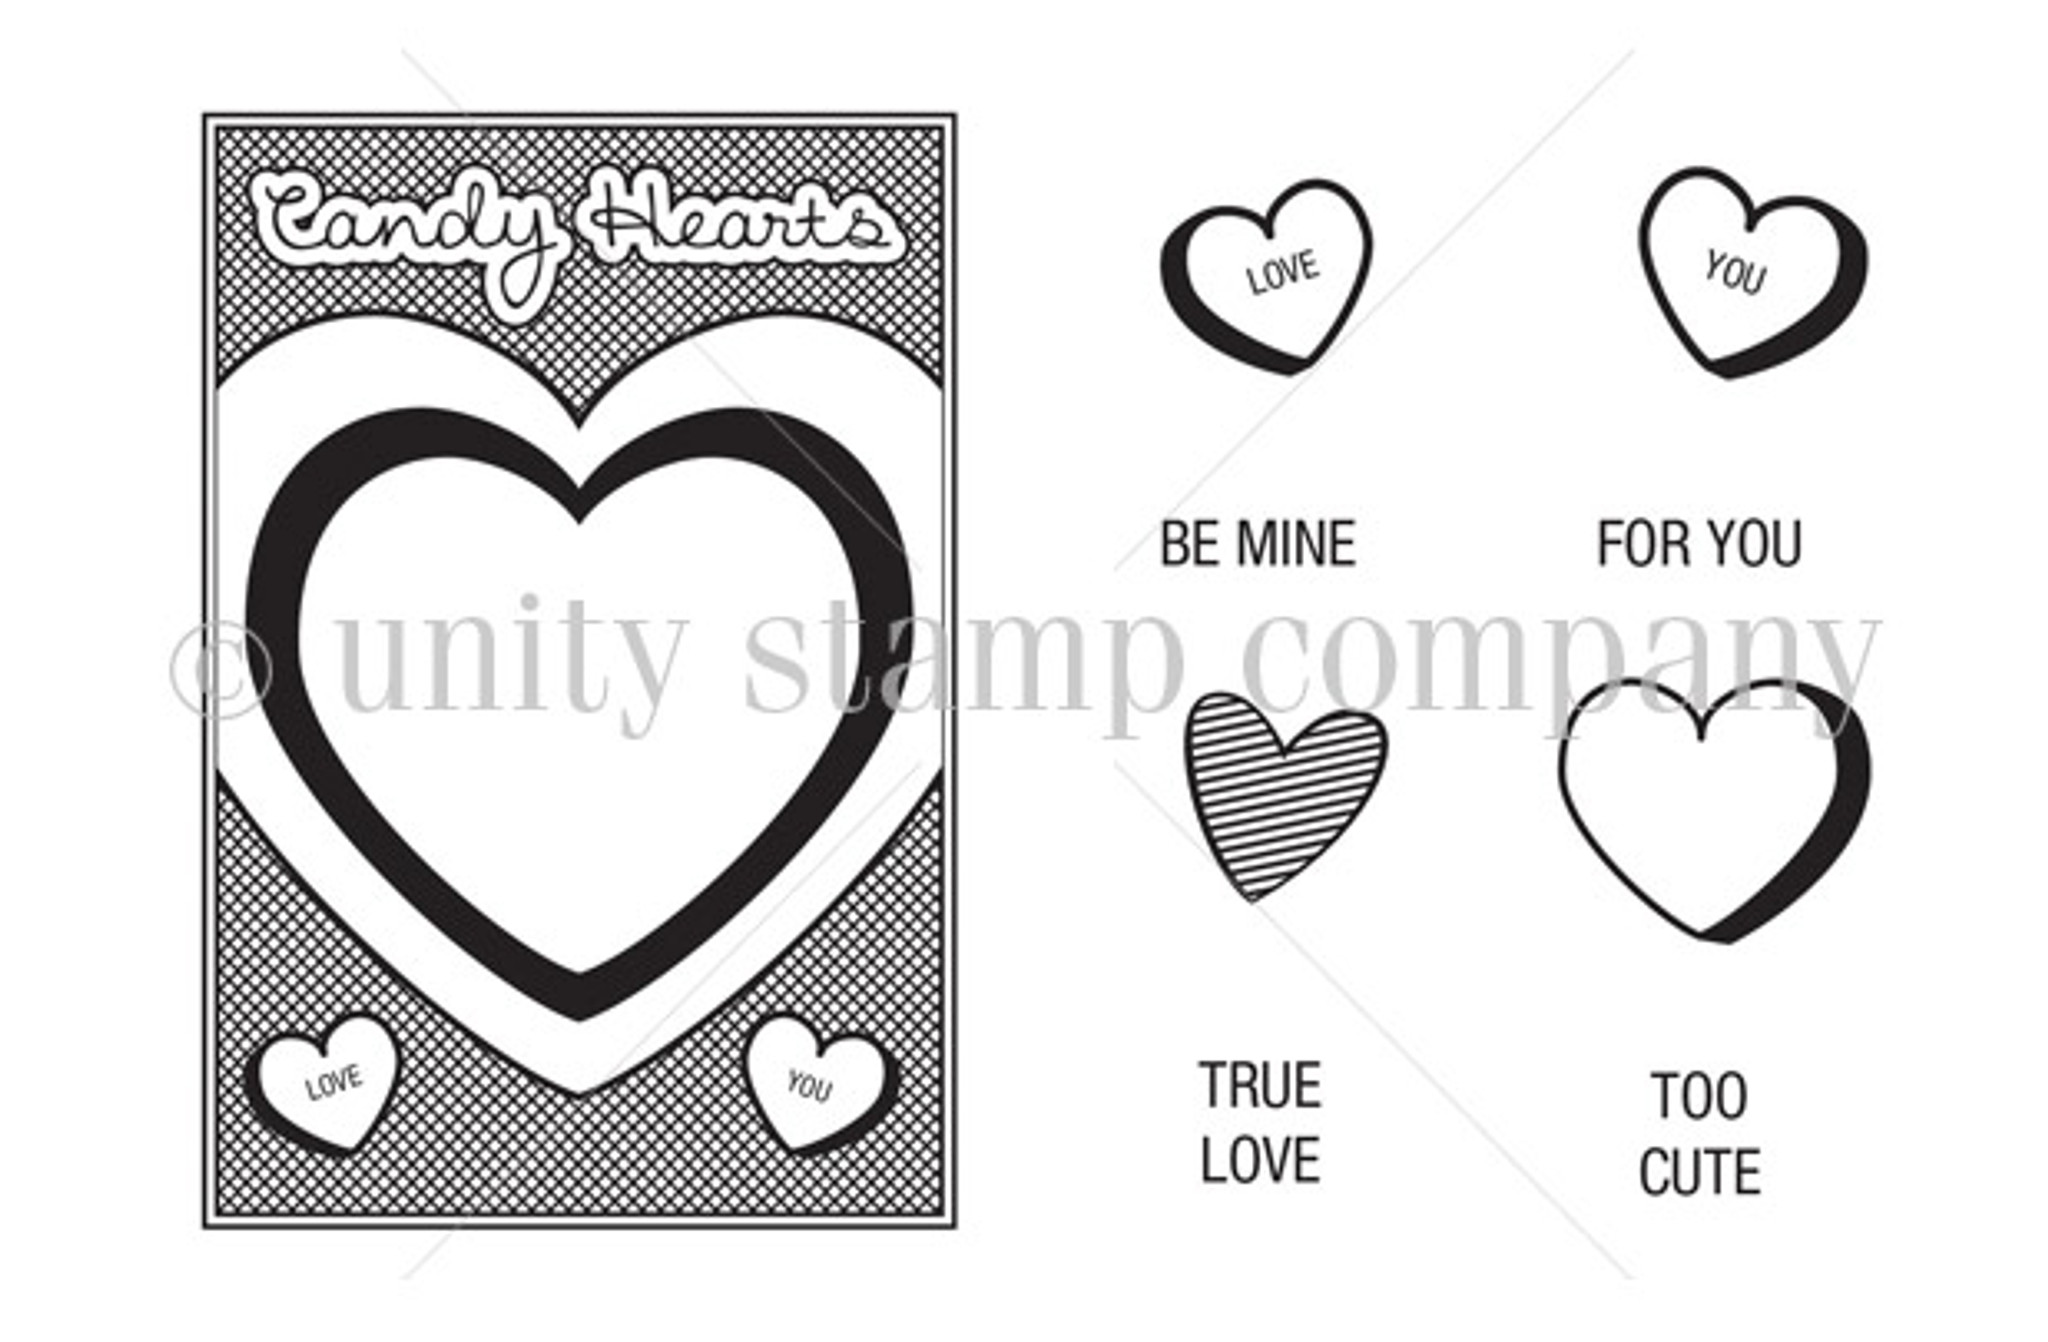 Candy Hearts - Unity Stamp Company